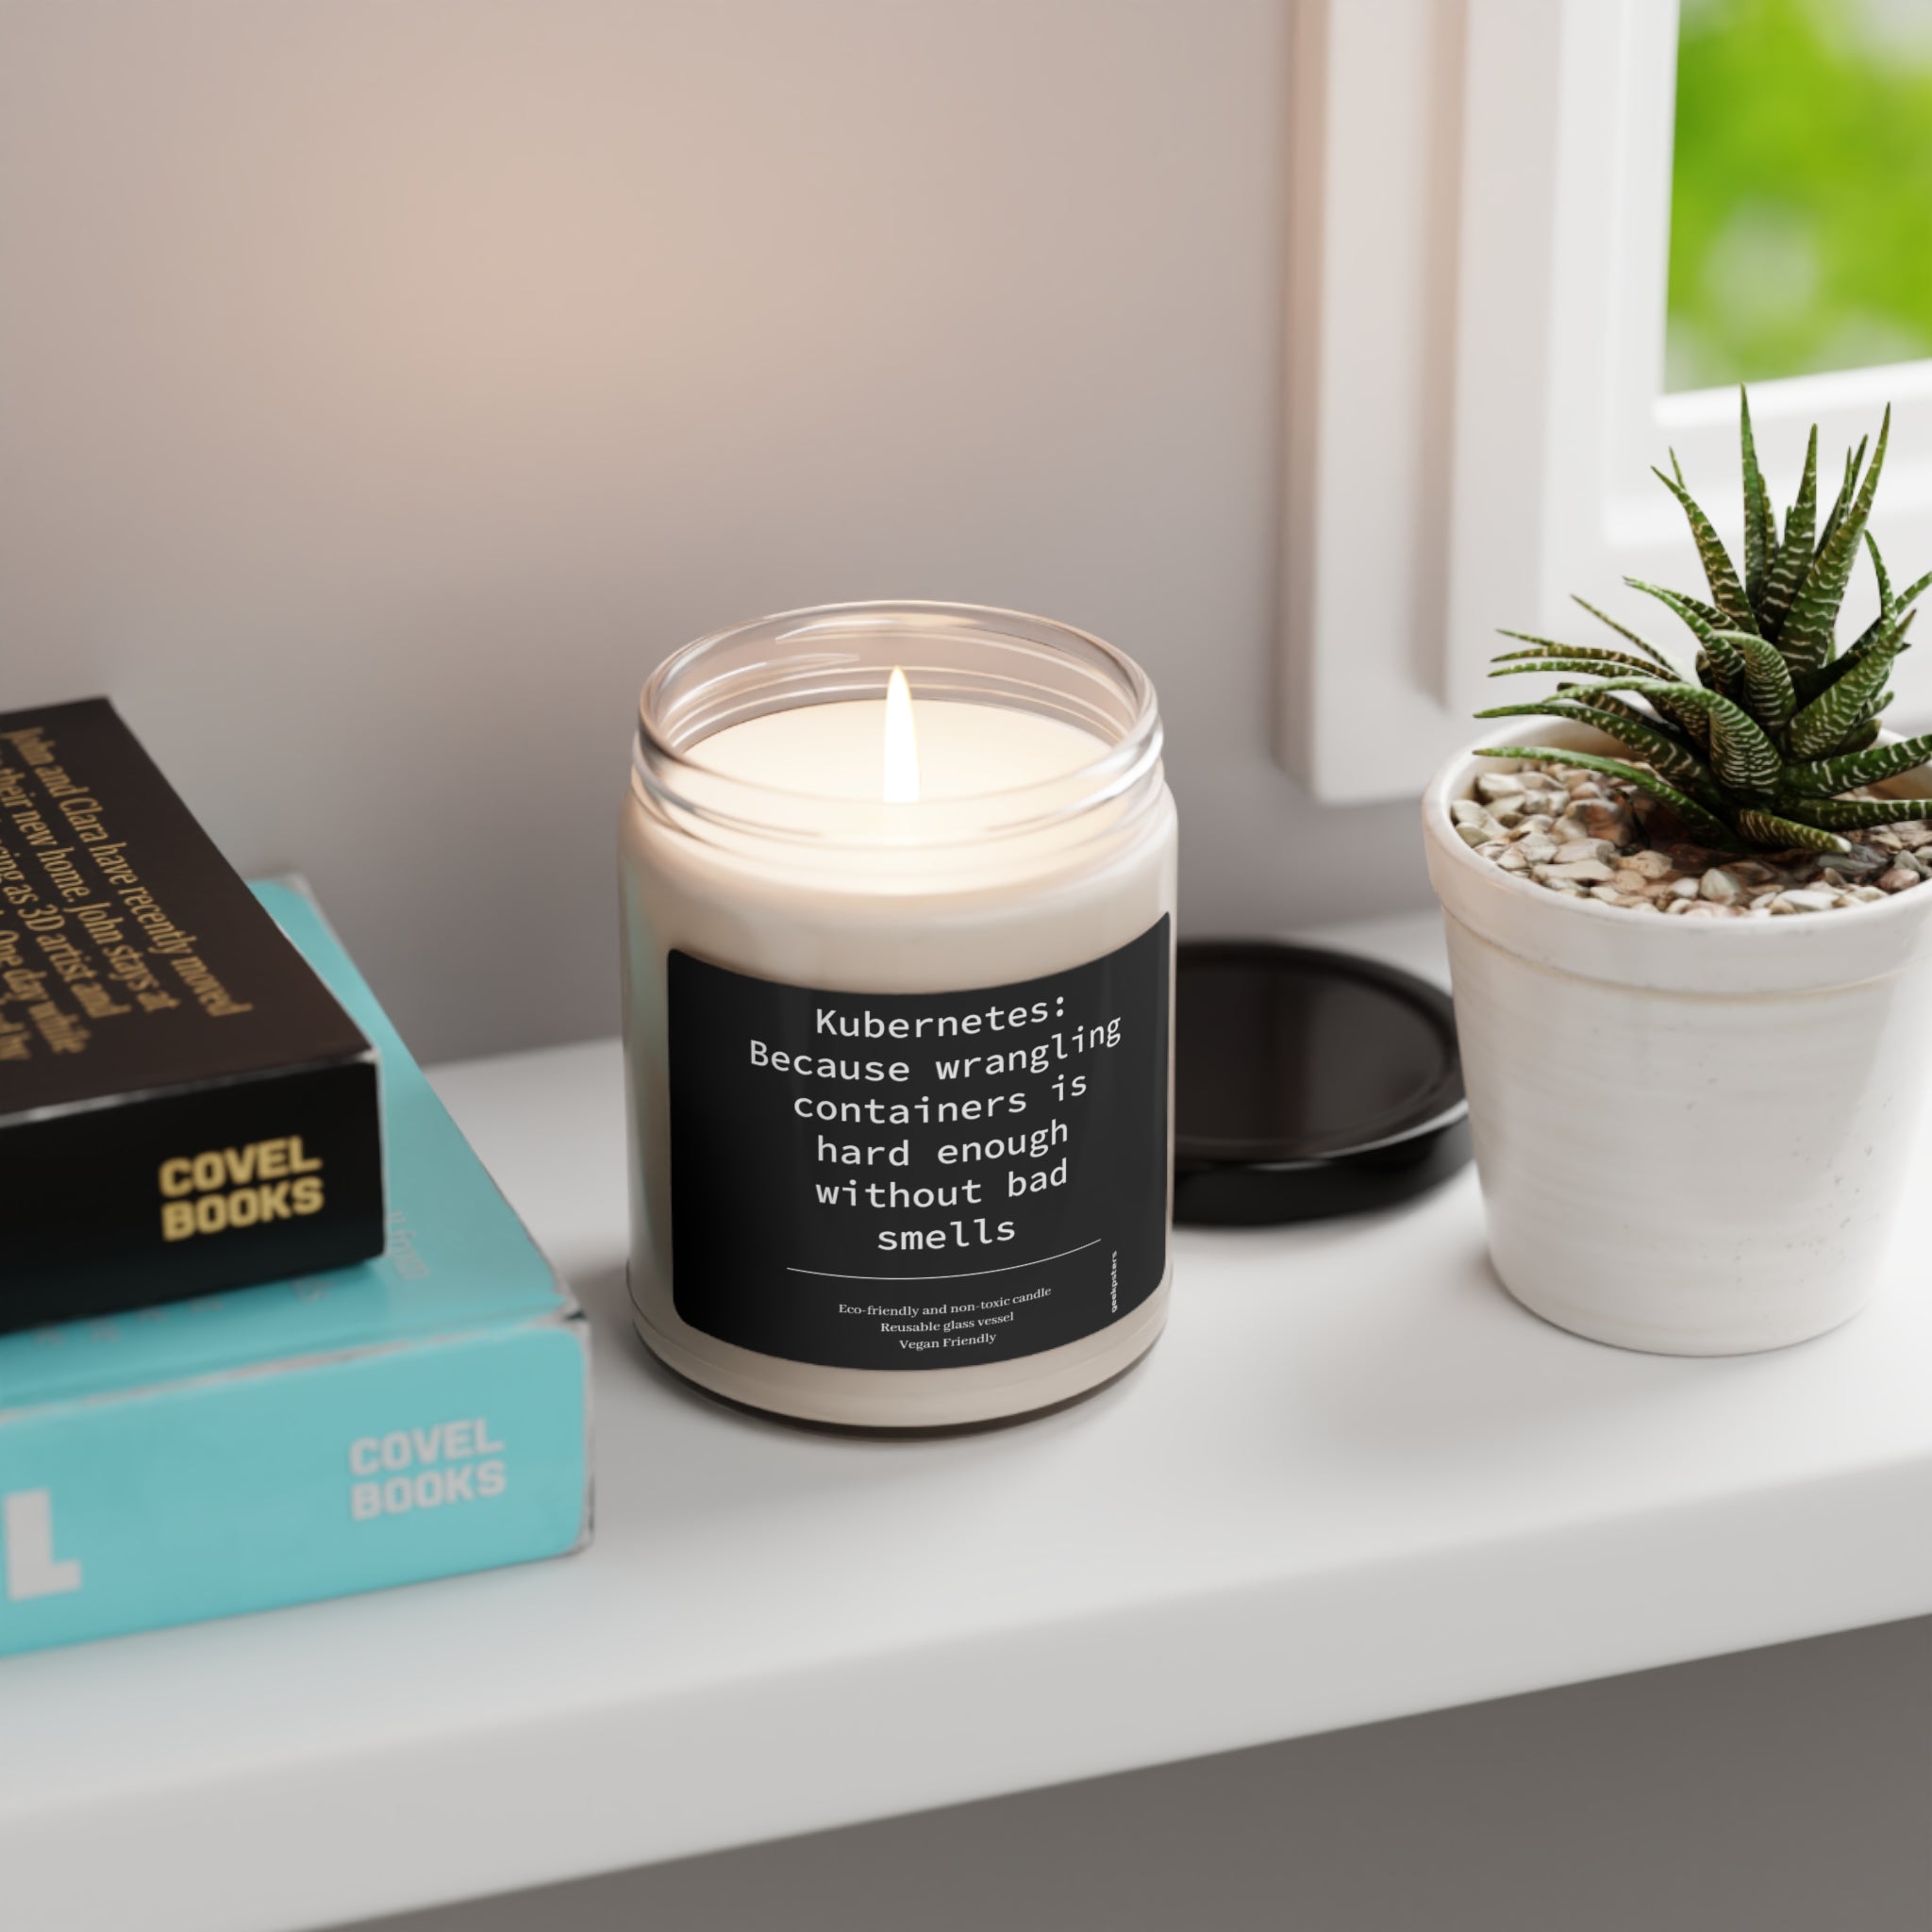 A Container Candle - Scented Soy Candle, 9oz in a glass jar with a label about Kubernetes next to books and a potted succulent by a window.